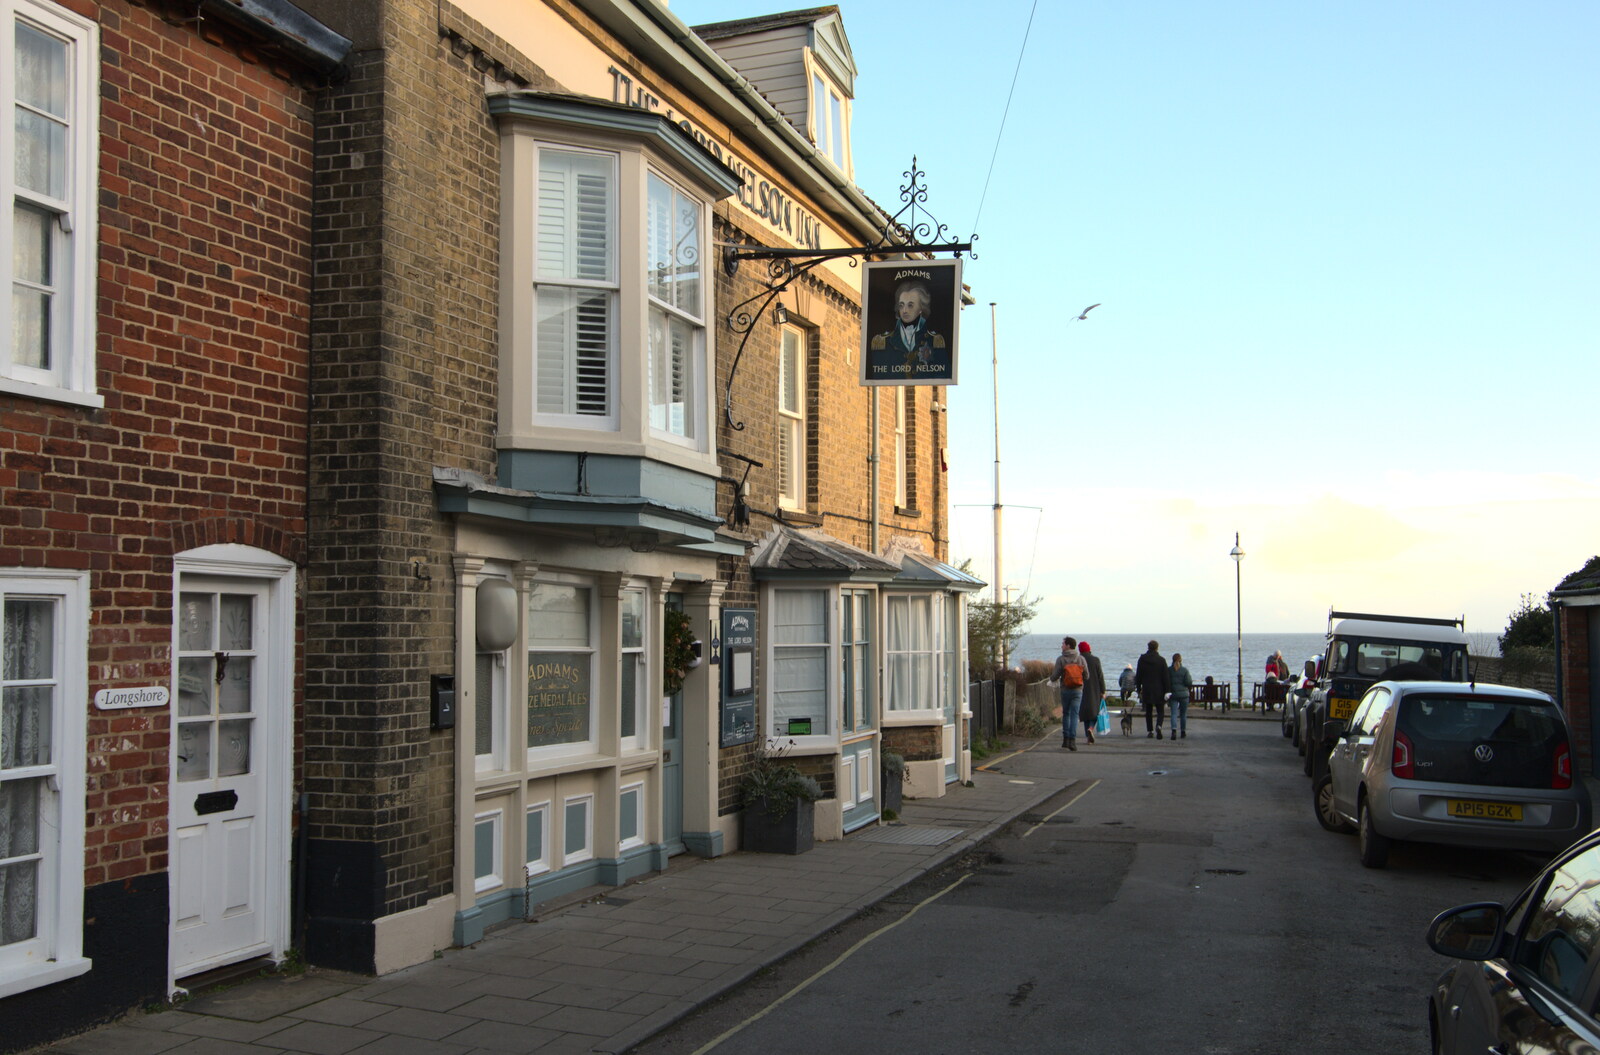 The sadly closed Lord Nelson pub from A Return to the Beach, Southwold, Suffolk - 20th December 2020